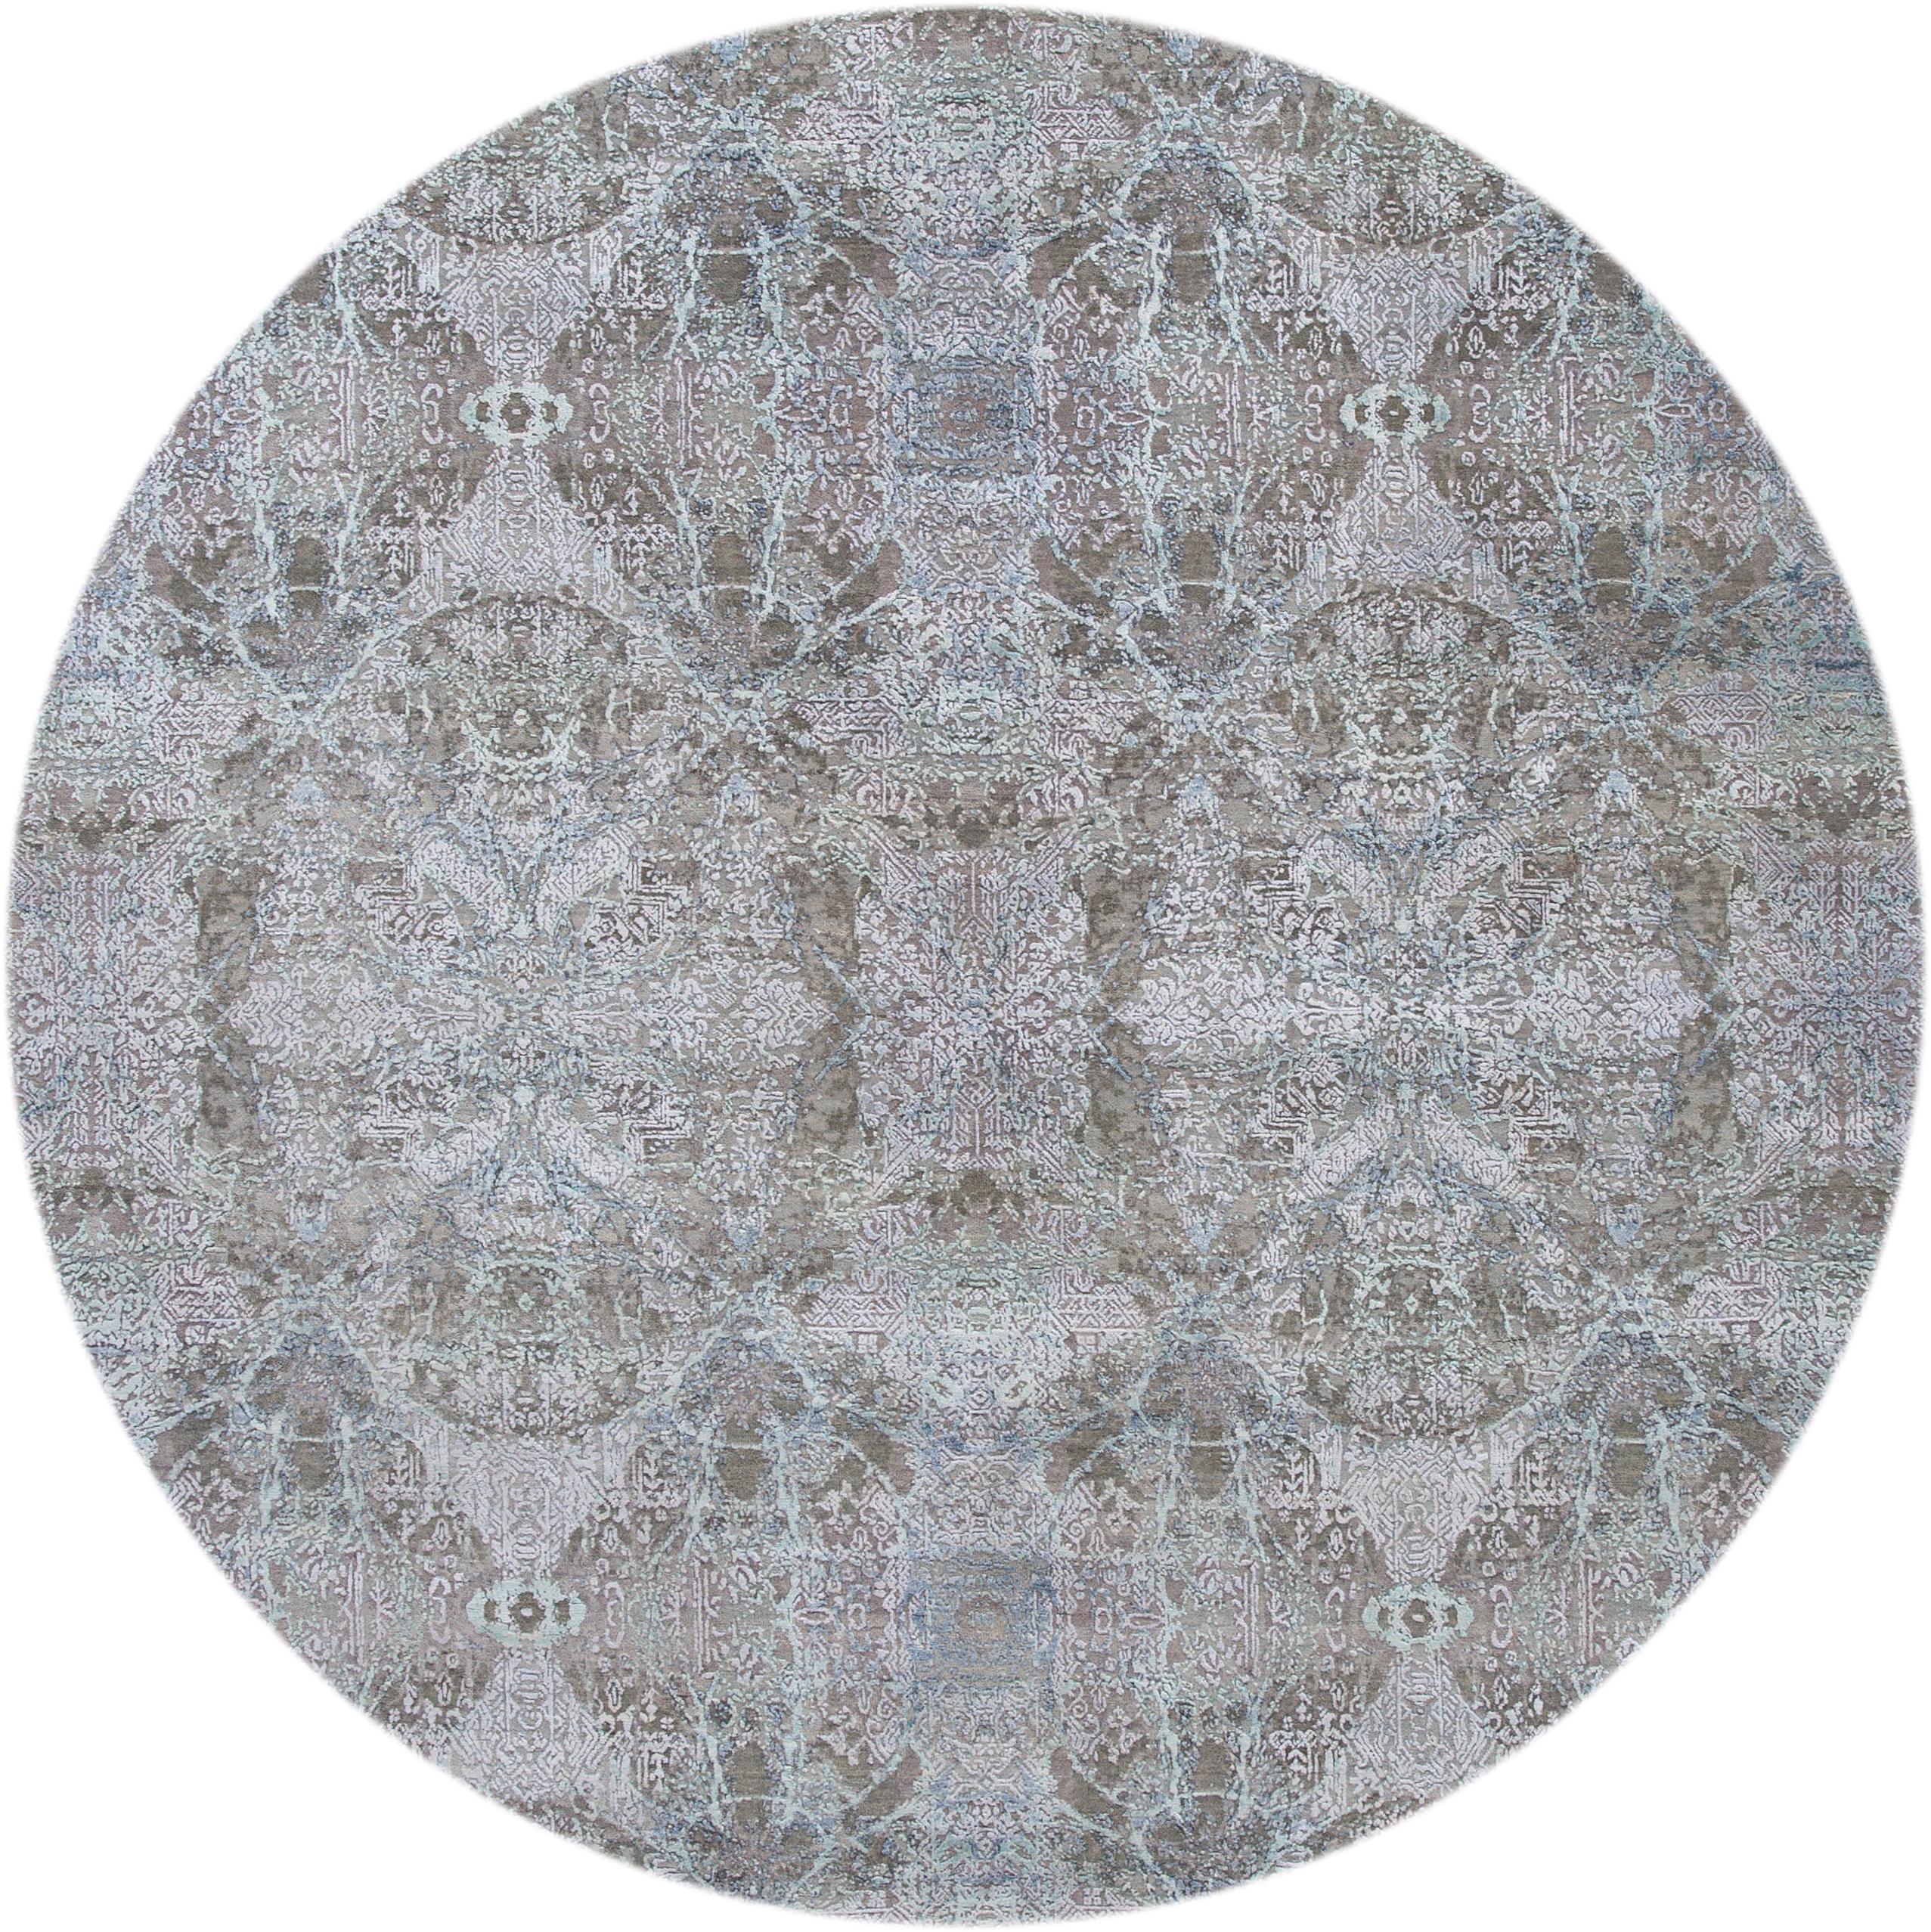 Beautiful contemporary Indian Tabriz rug, hand knotted wool and silk in a gray field, ivory and blue accents in a Classic motif, circa 2019.
This rug measures 8' 11